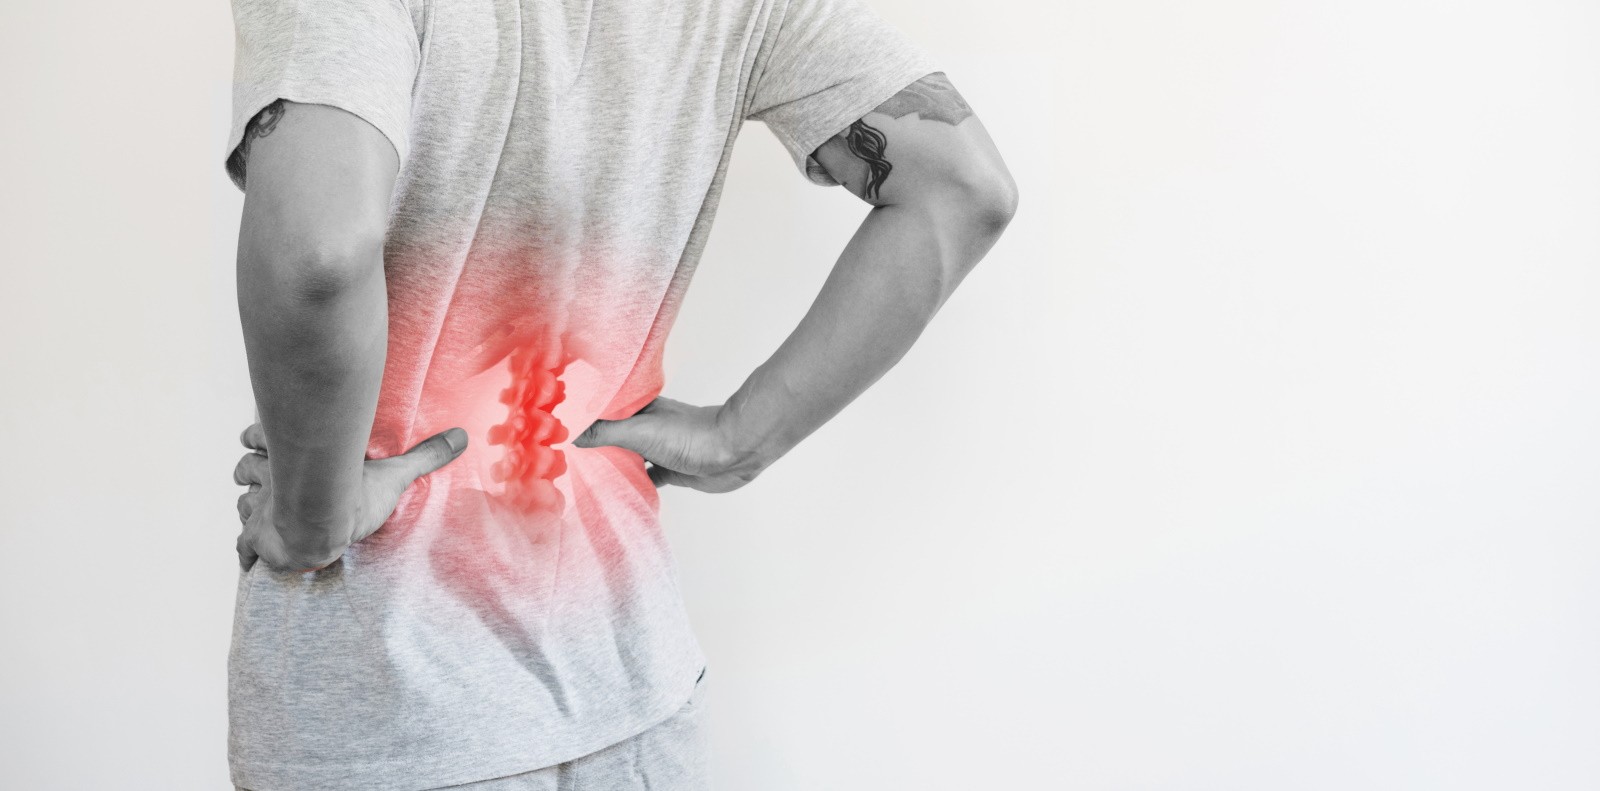 5 Common Causes of Lower Back Pain & Steps to Relief